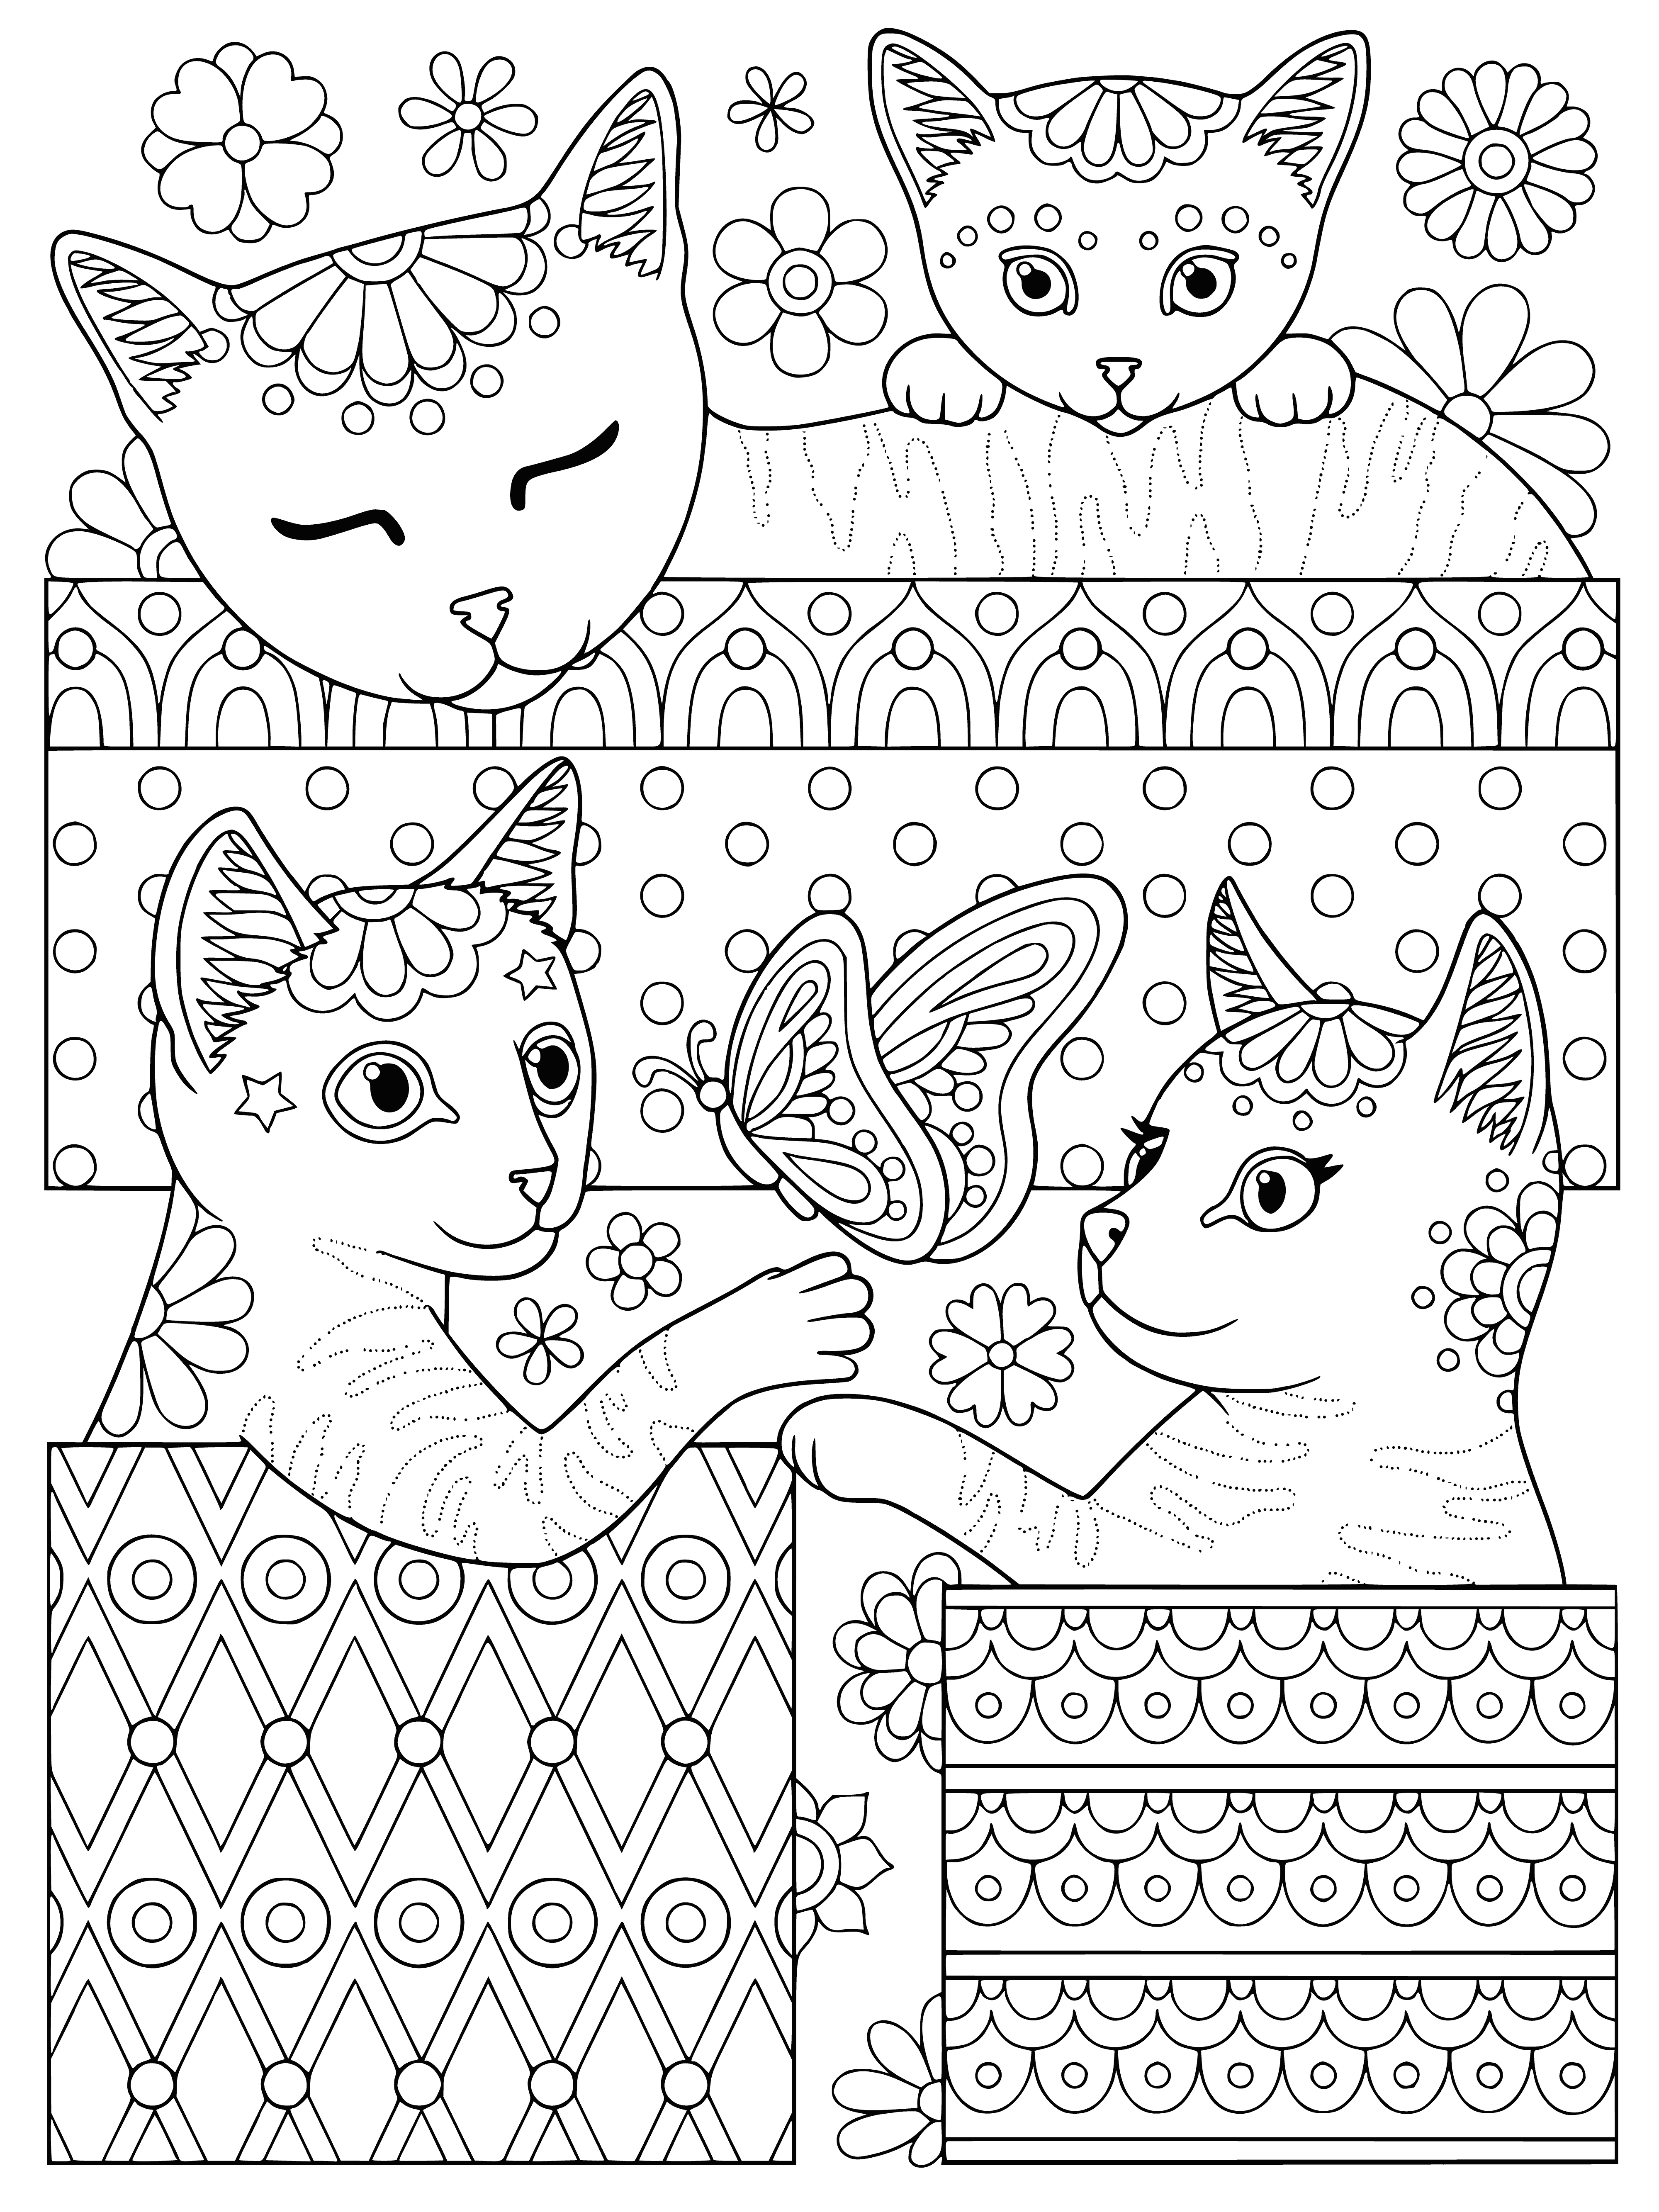 coloring page: Two cats, one in and one out of a box--gray/white and black/white.